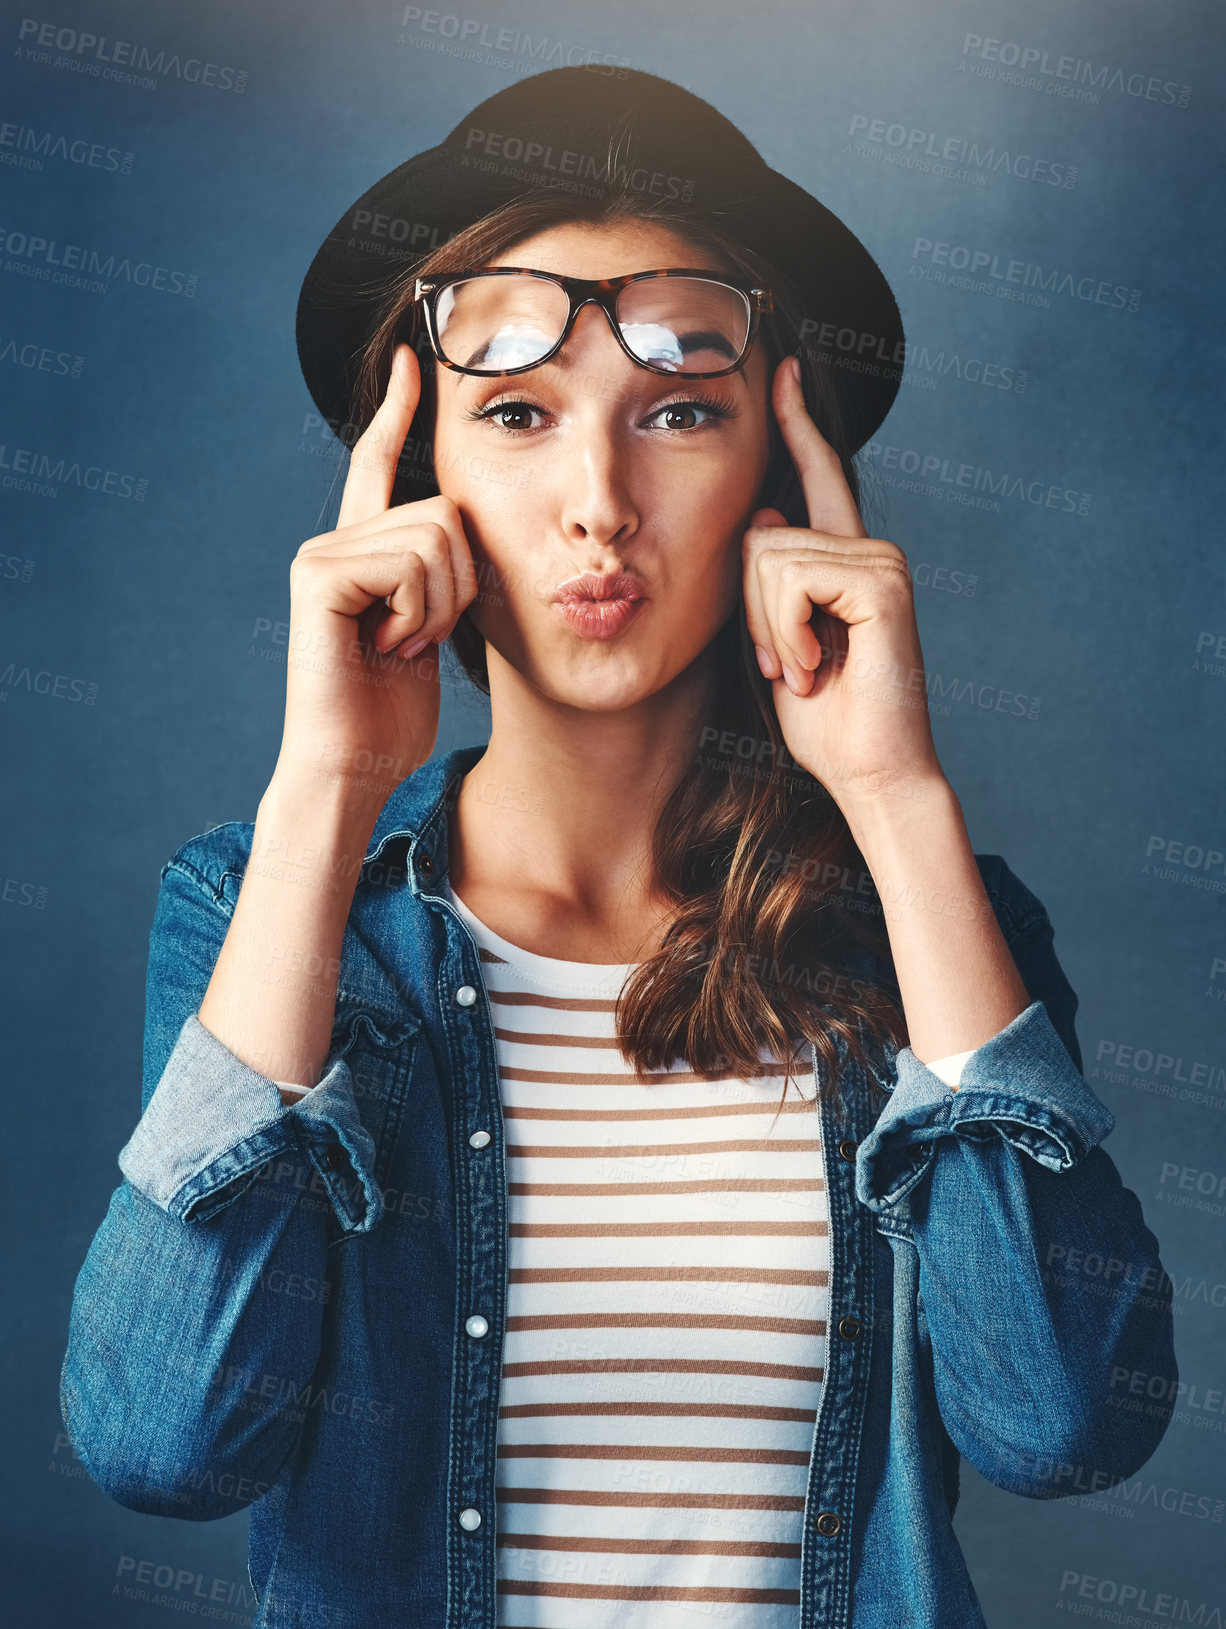 Buy stock photo Studio shot of an attractive young woman lifting her glasses and pouting against a blue background